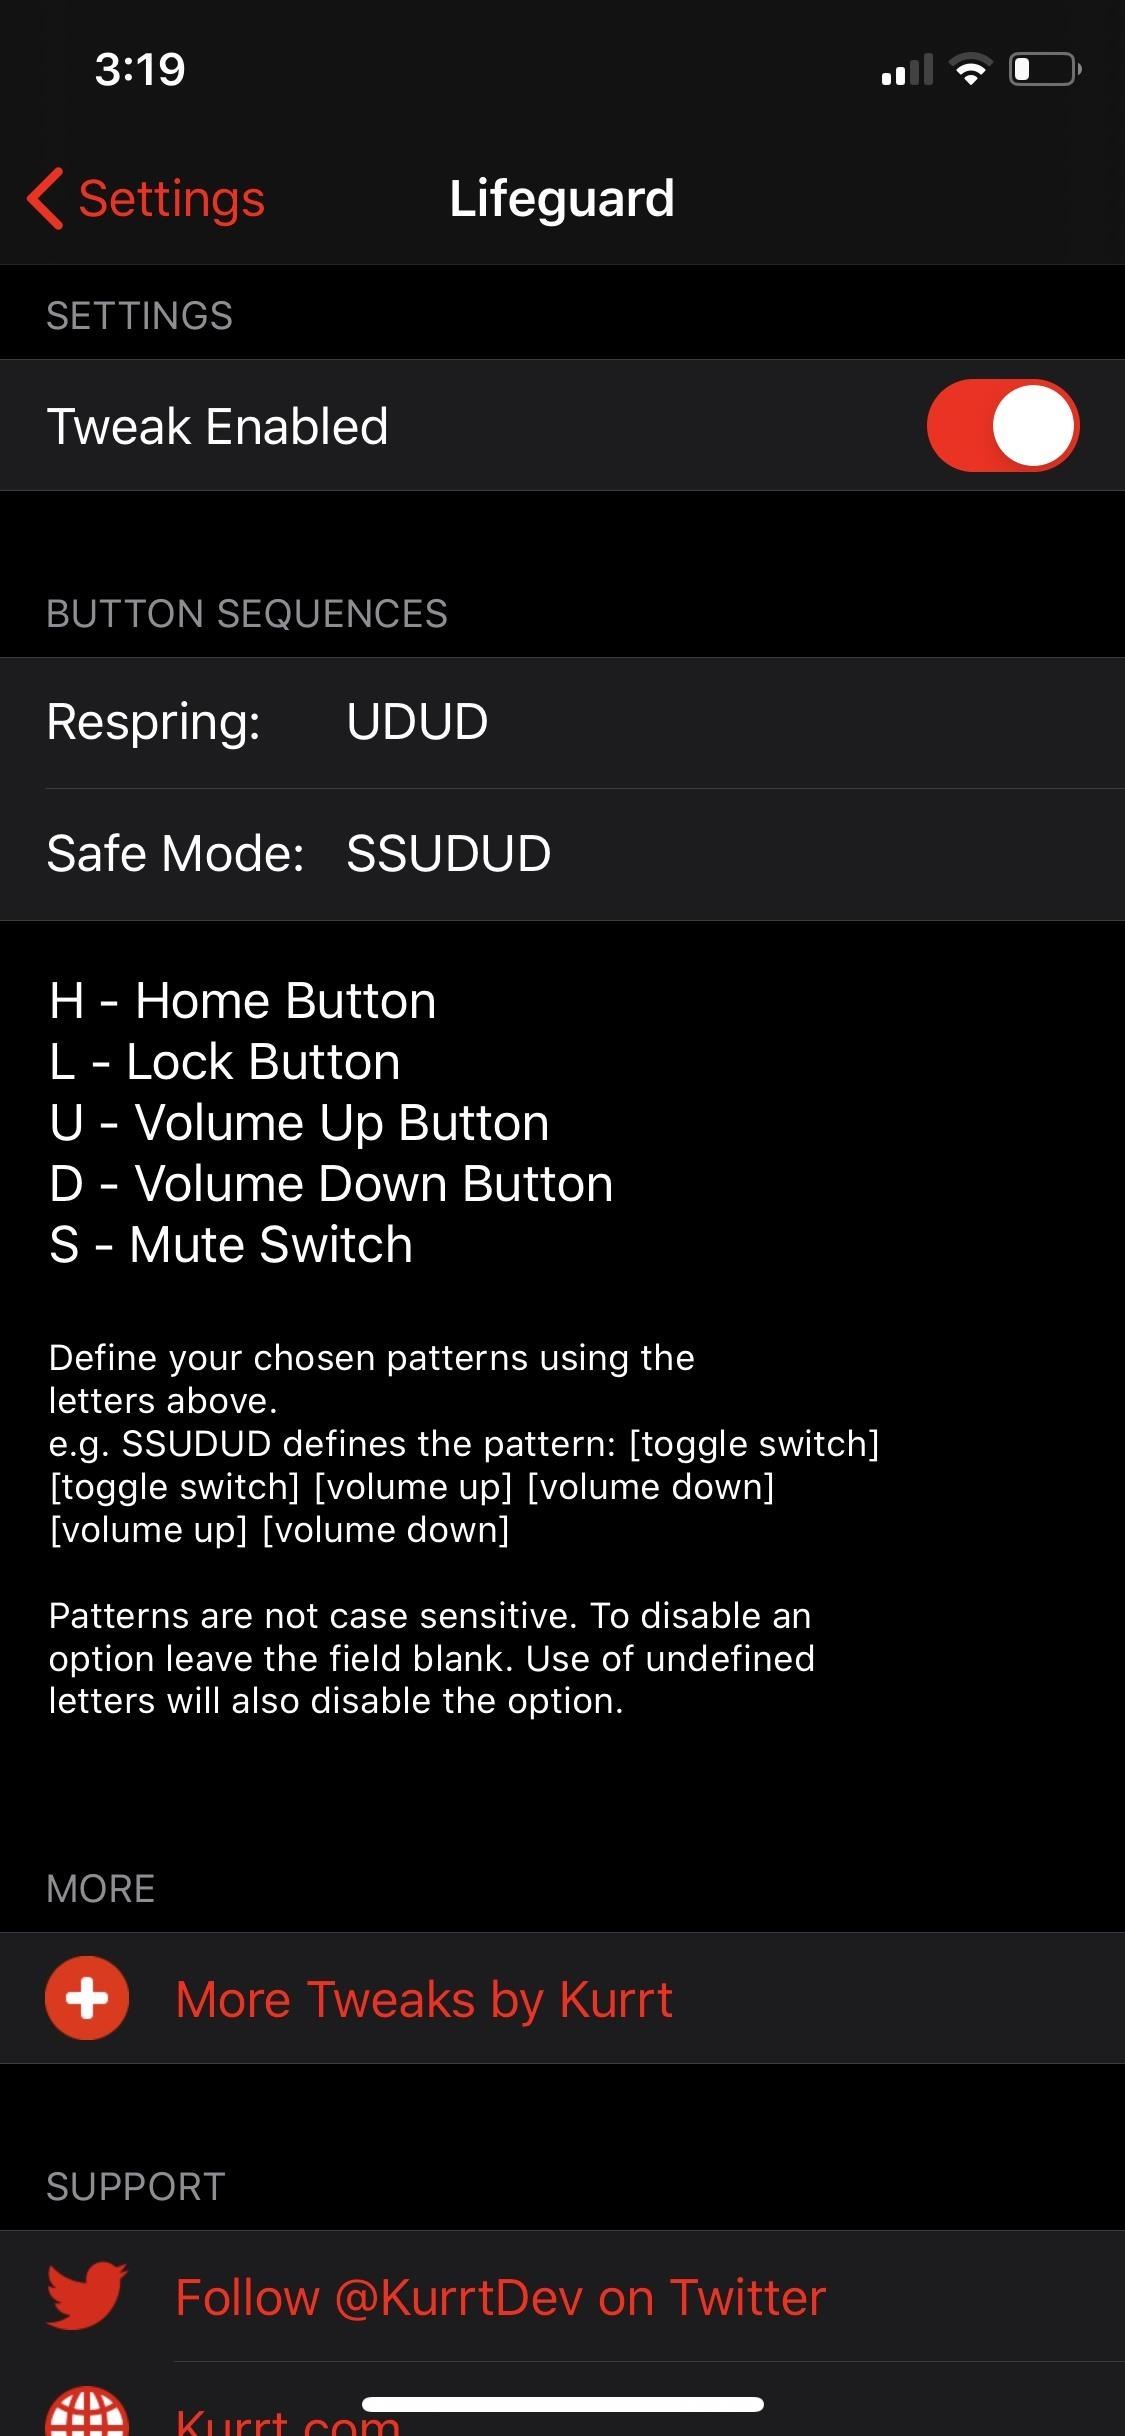 Use the Volume Buttons to Respring Your Buggy iPhone Without Having to Re-Jailbreak